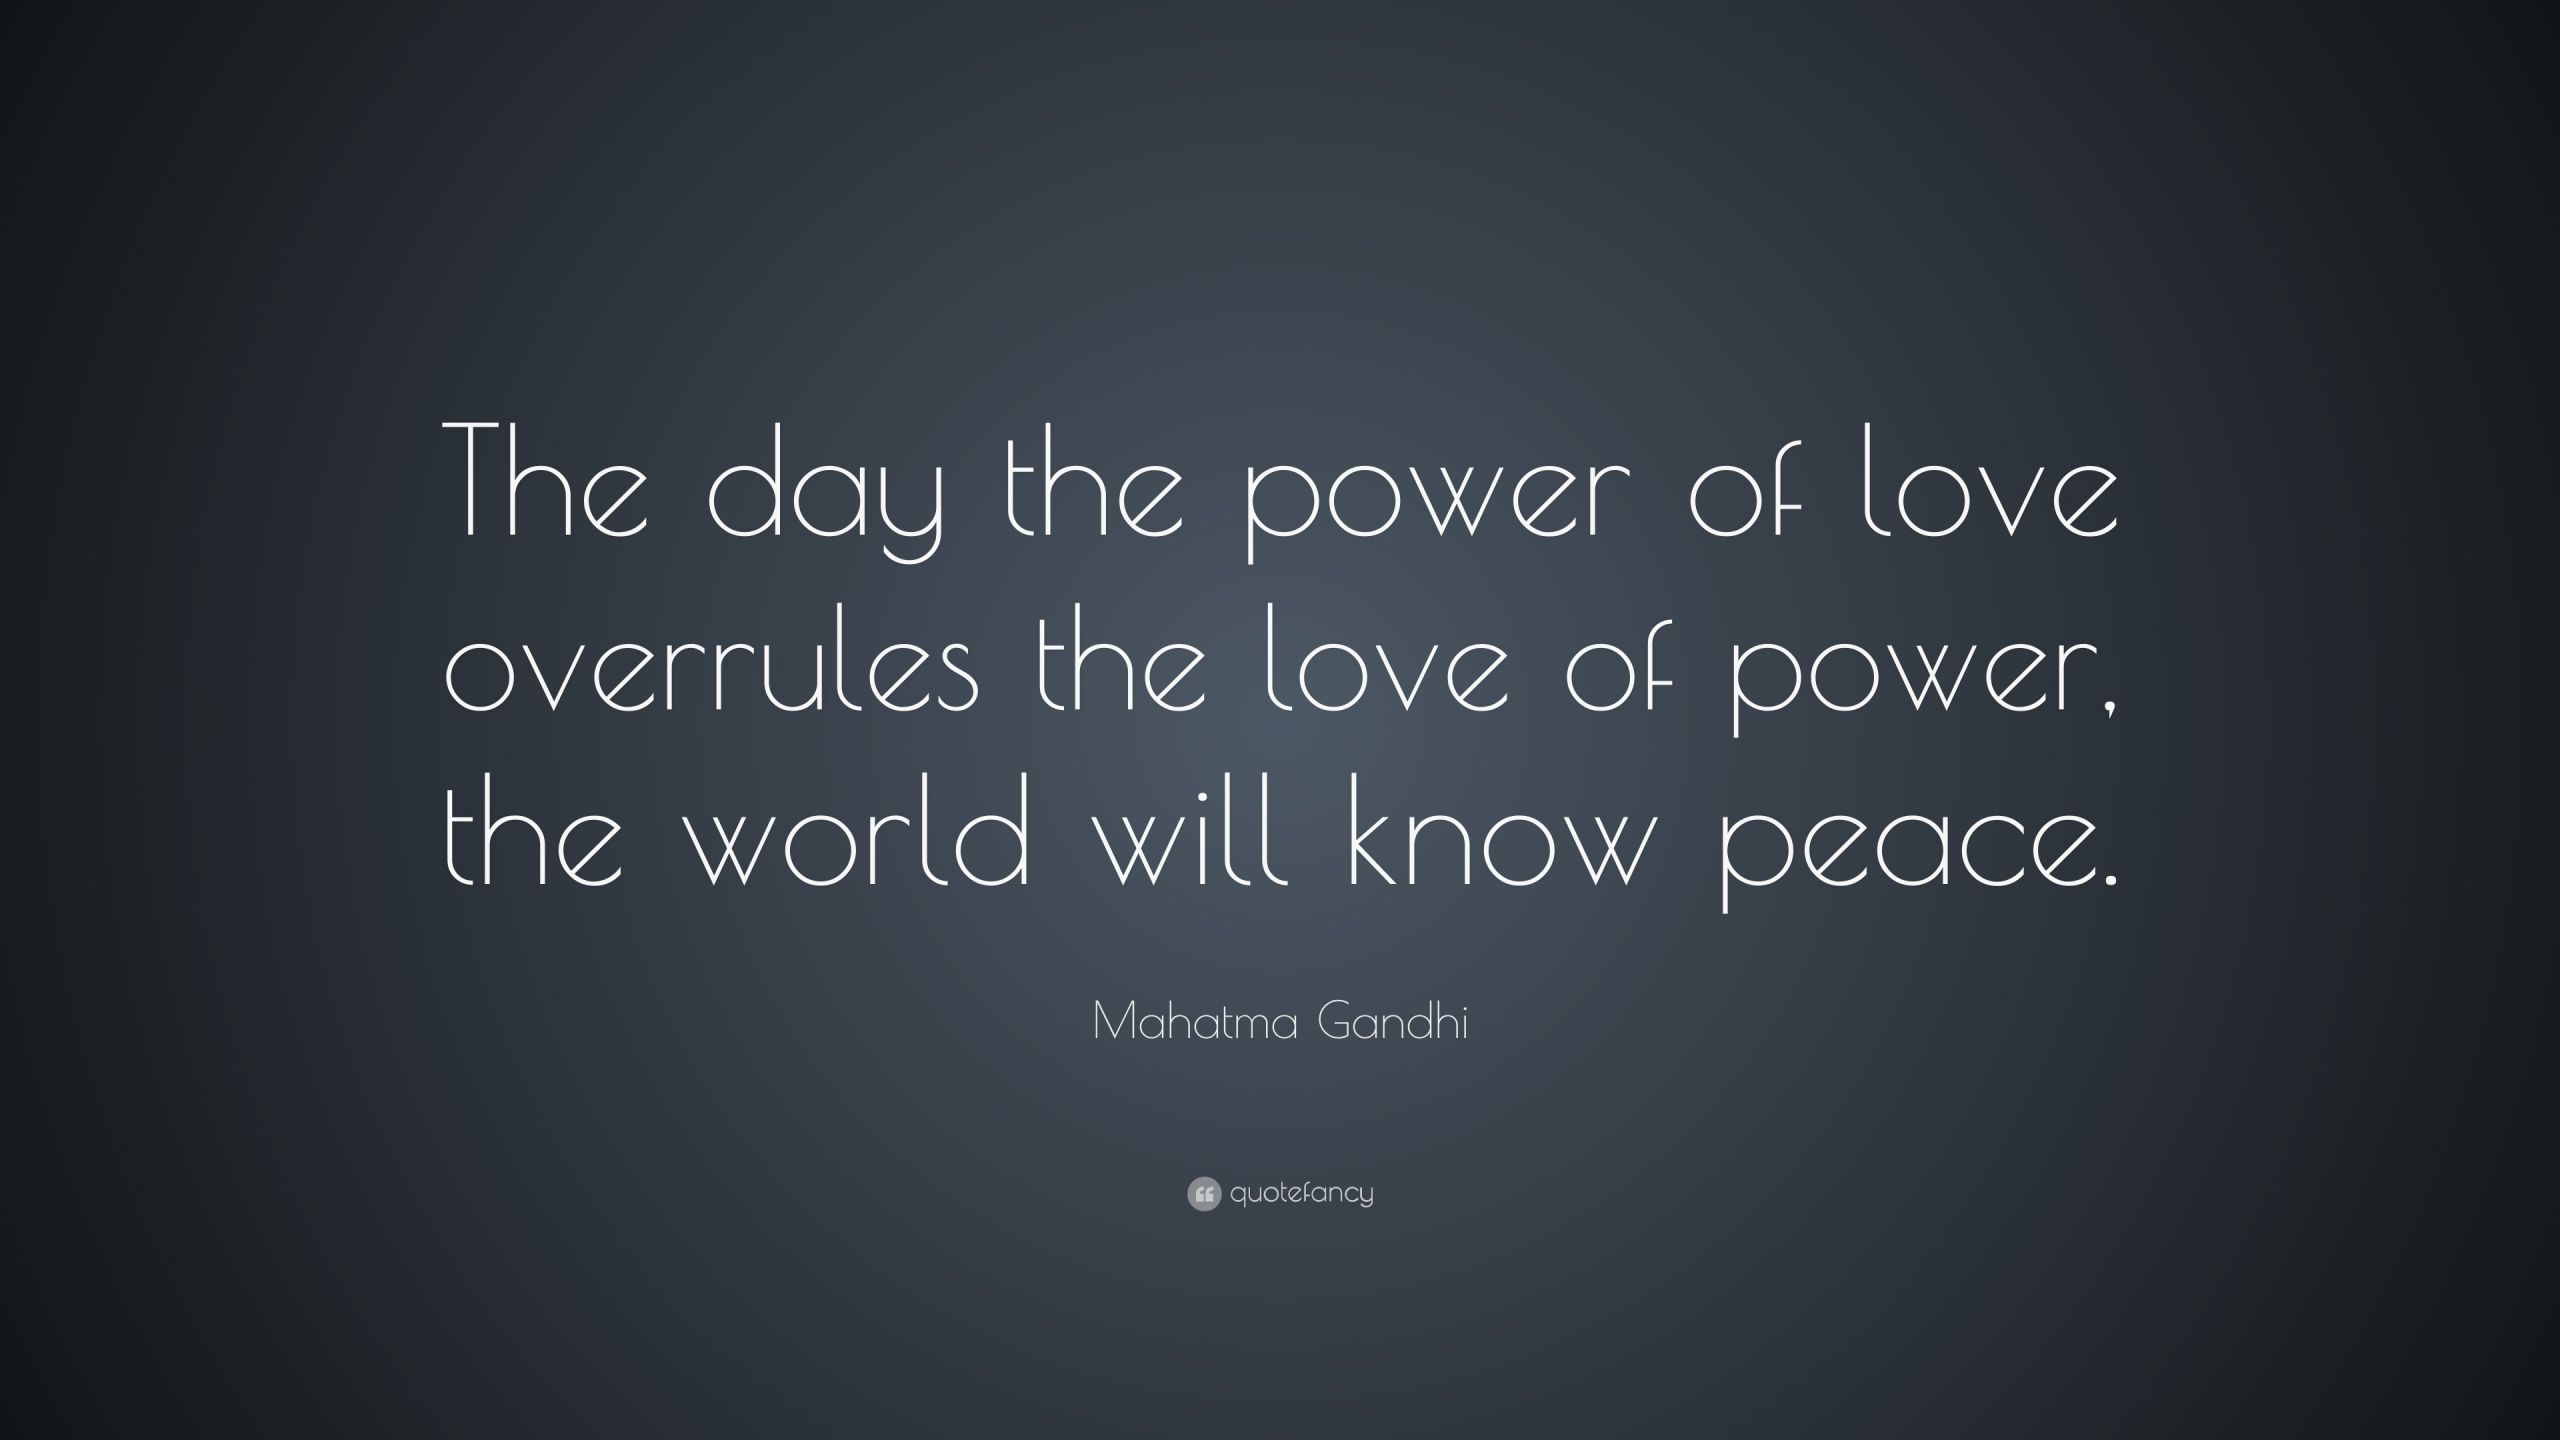 The Power Of Love Quote
 Mahatma Gandhi Quote “The day the power of love overrules